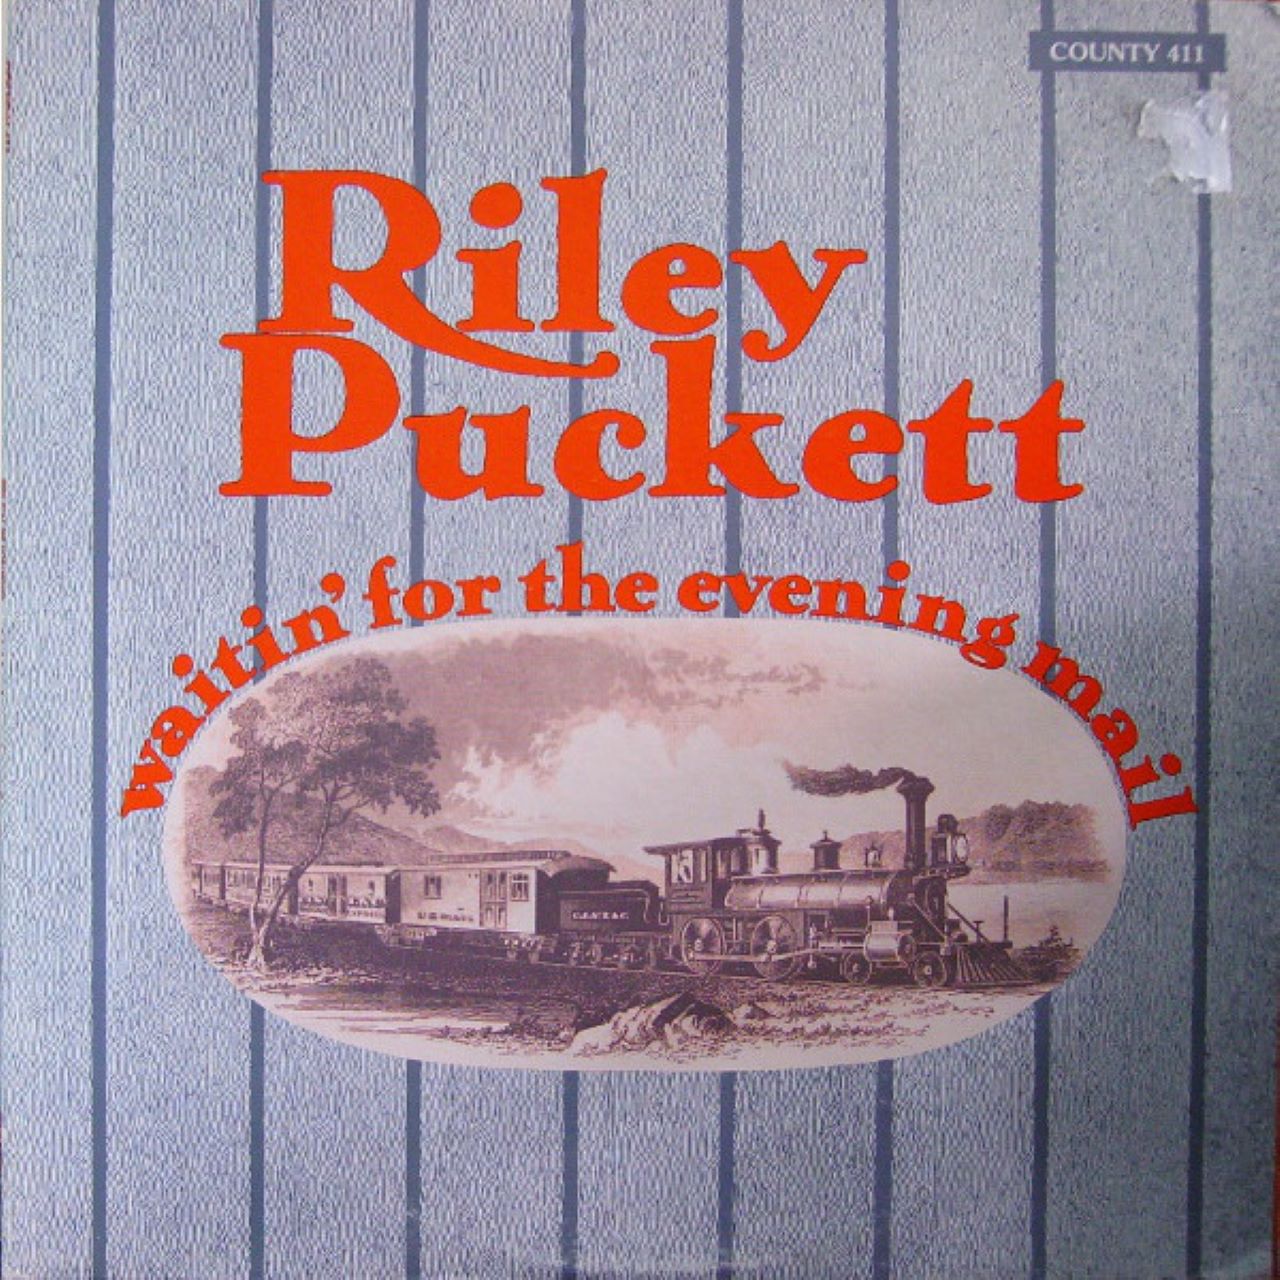 Riley Puckett - Waitin' For The Evening Mail cover album